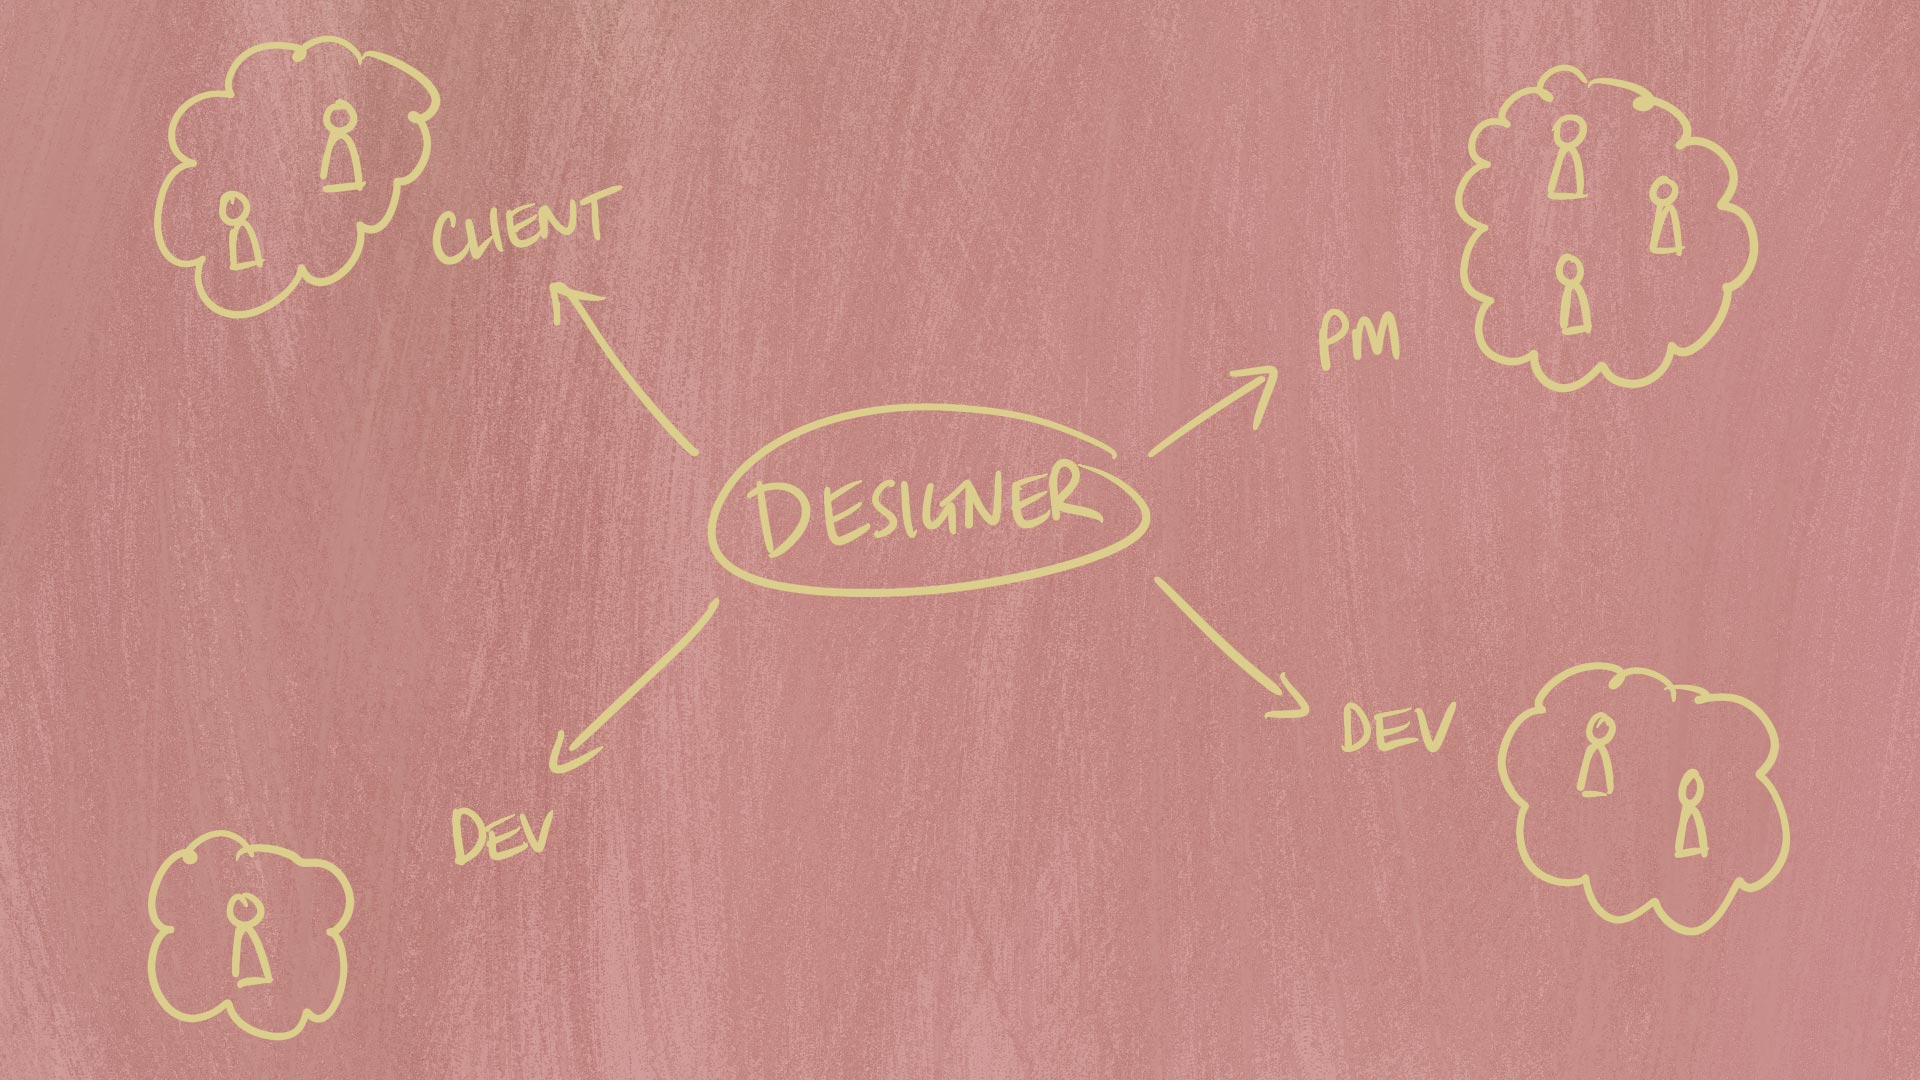 A diagram showing that, at a team level, 4 people can have 12 different versions of what a designer is in their heads